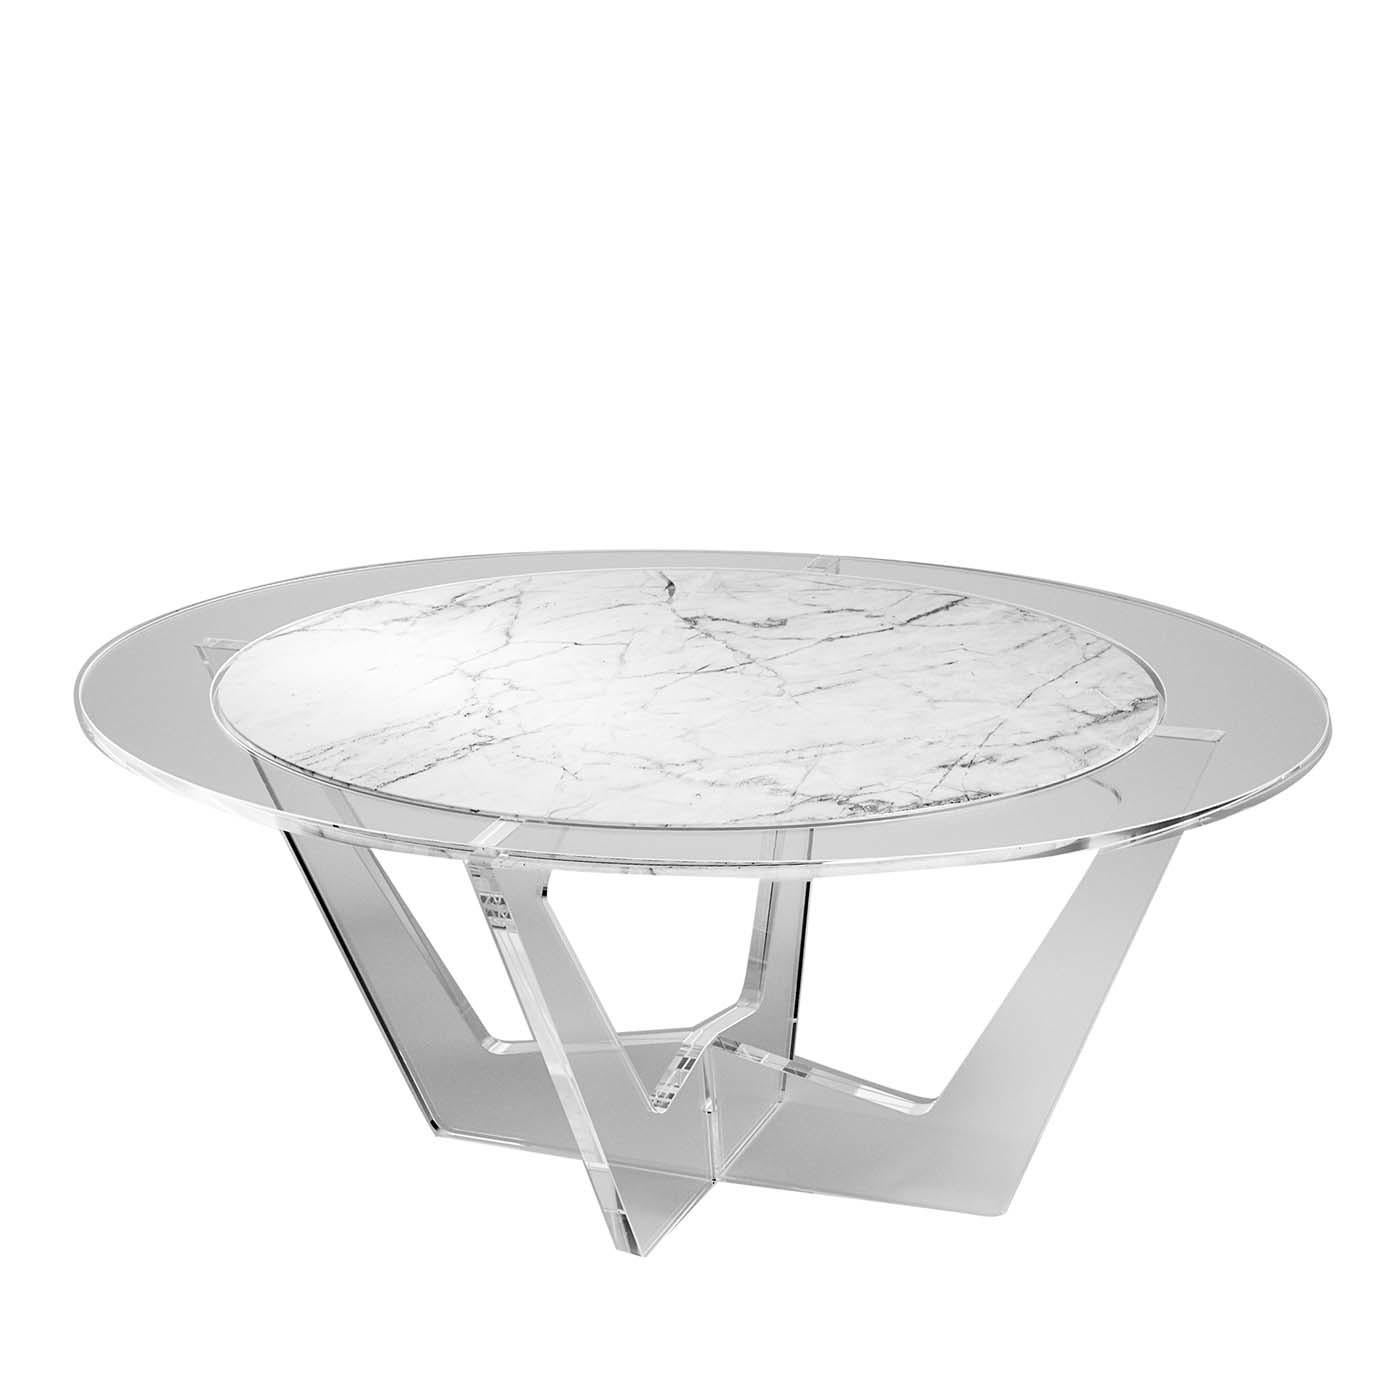 Contemporary Hac Oval Coffee Table with White Carrara Marble Top by Madea Milano